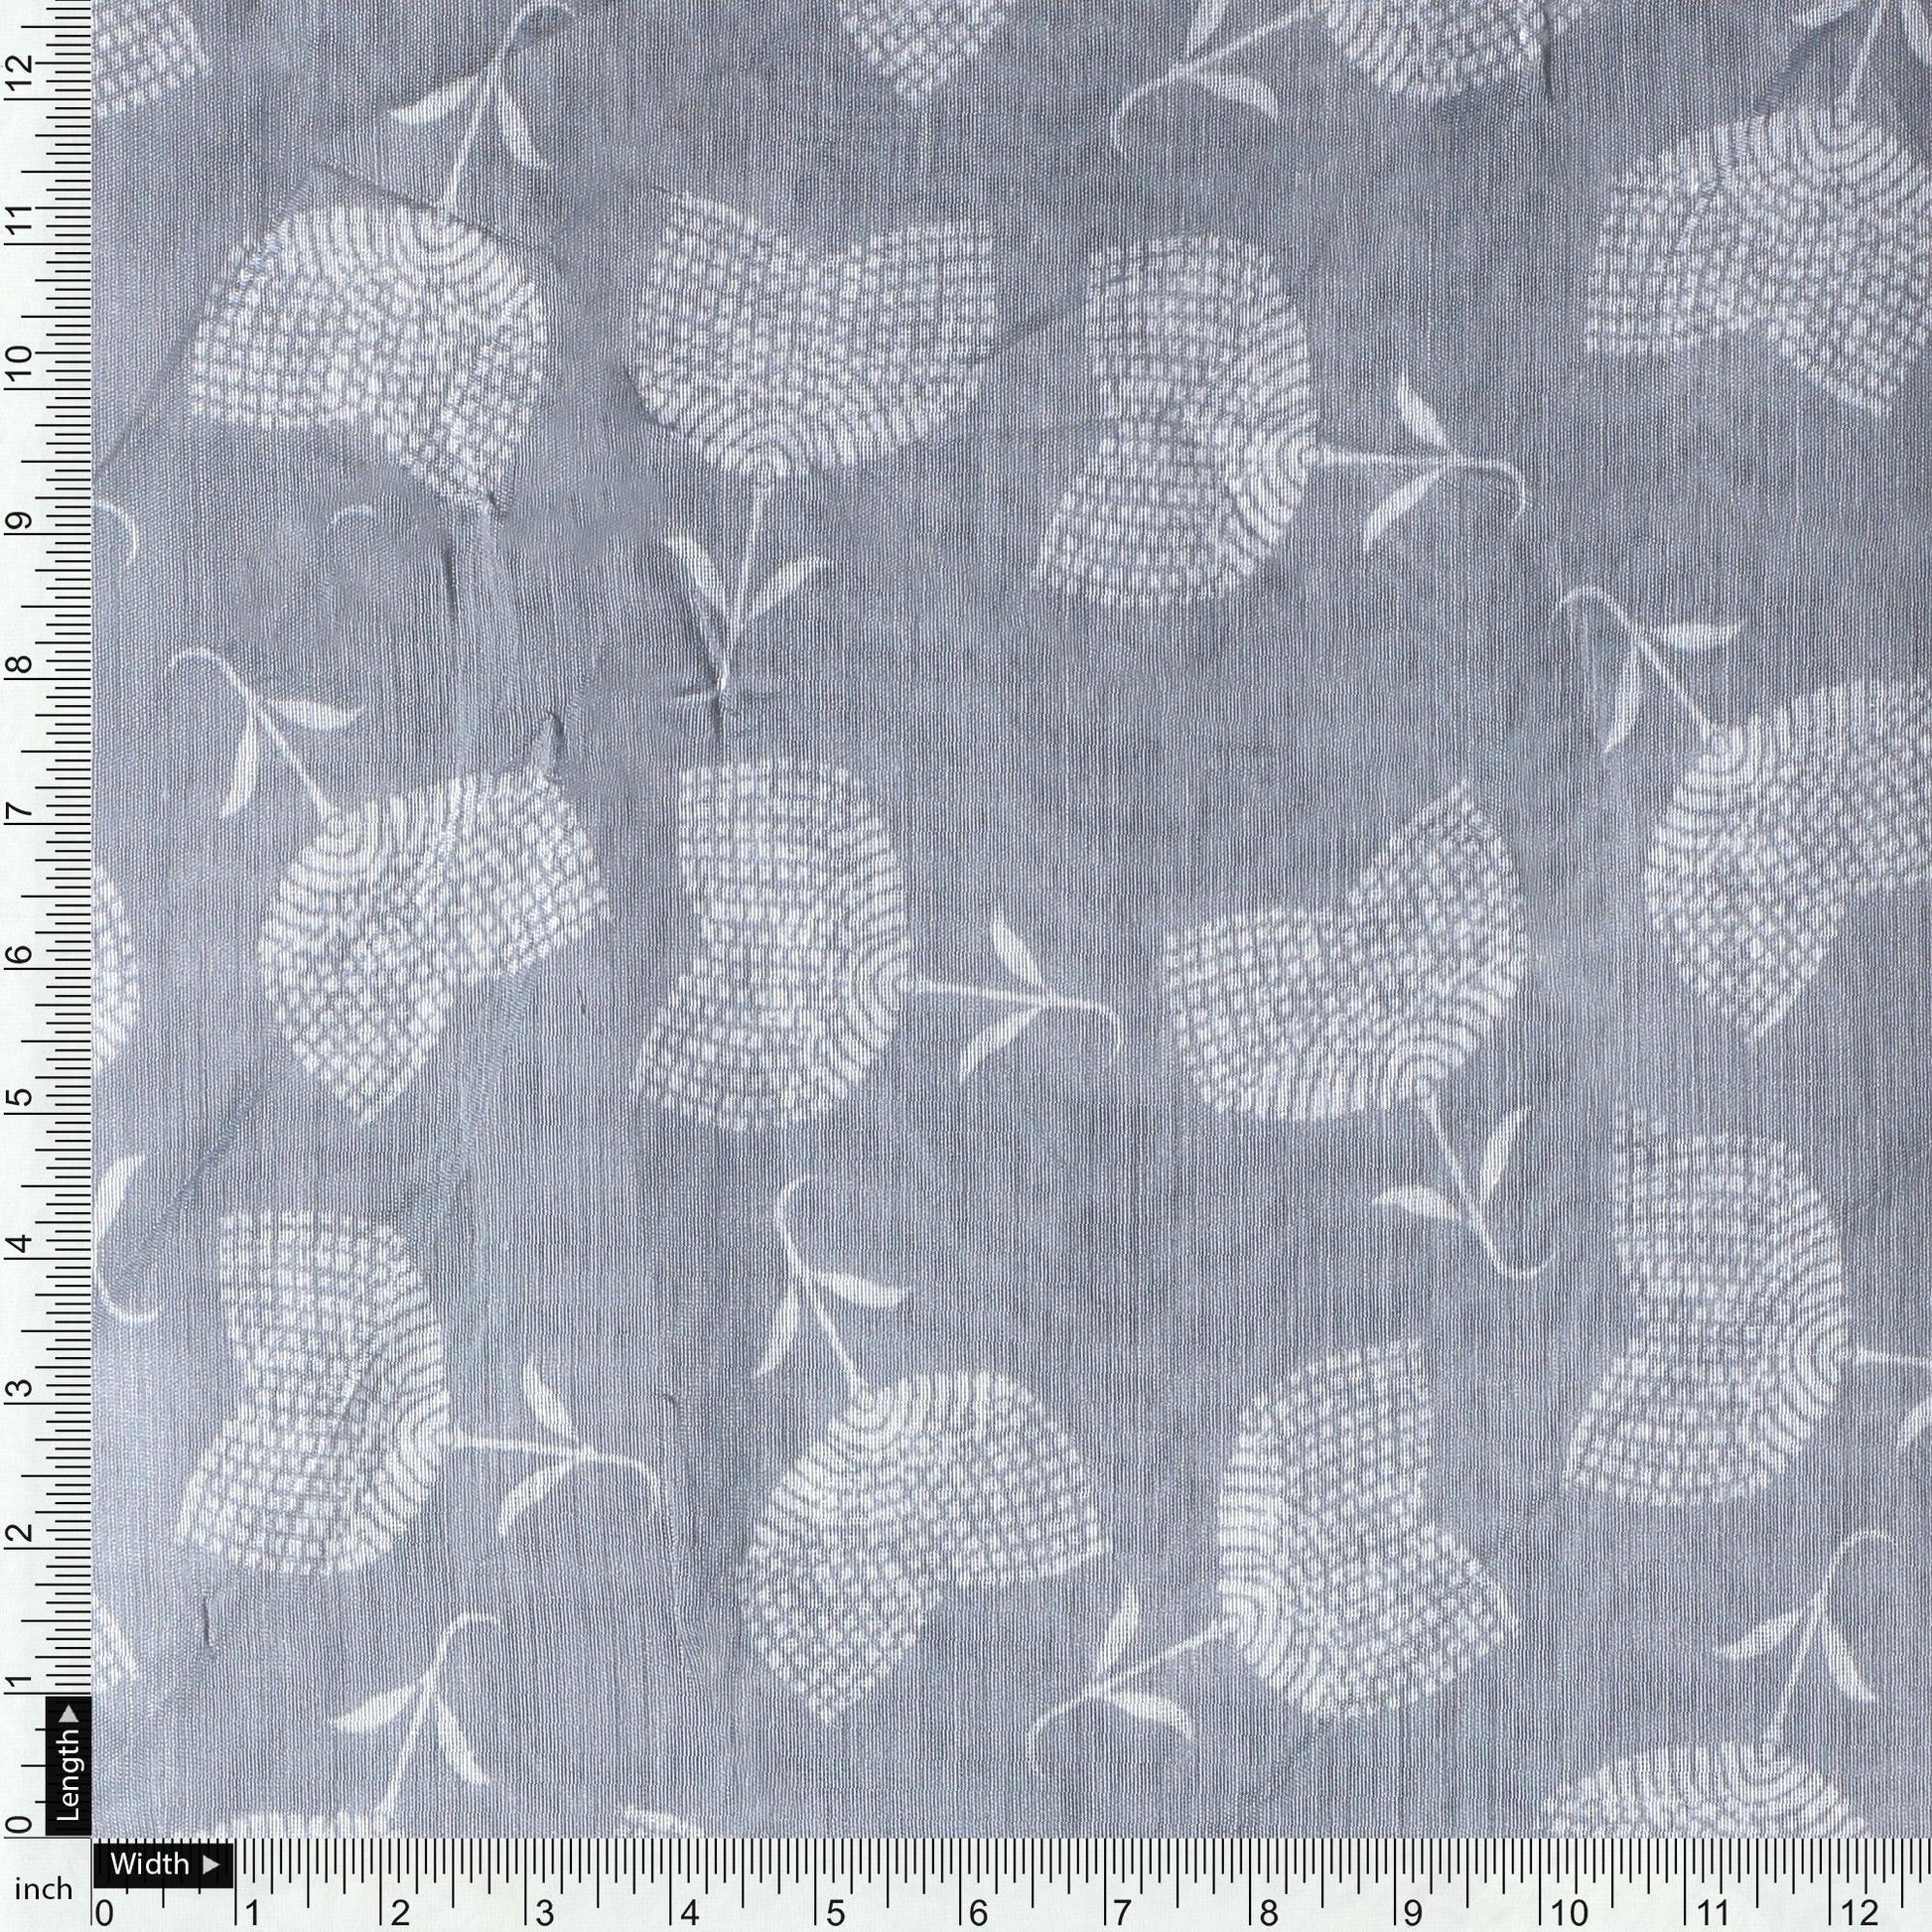 Chanderi Digital Printed Fabric in Gray with Decorative Pattern - FAB VOGUE Studio®